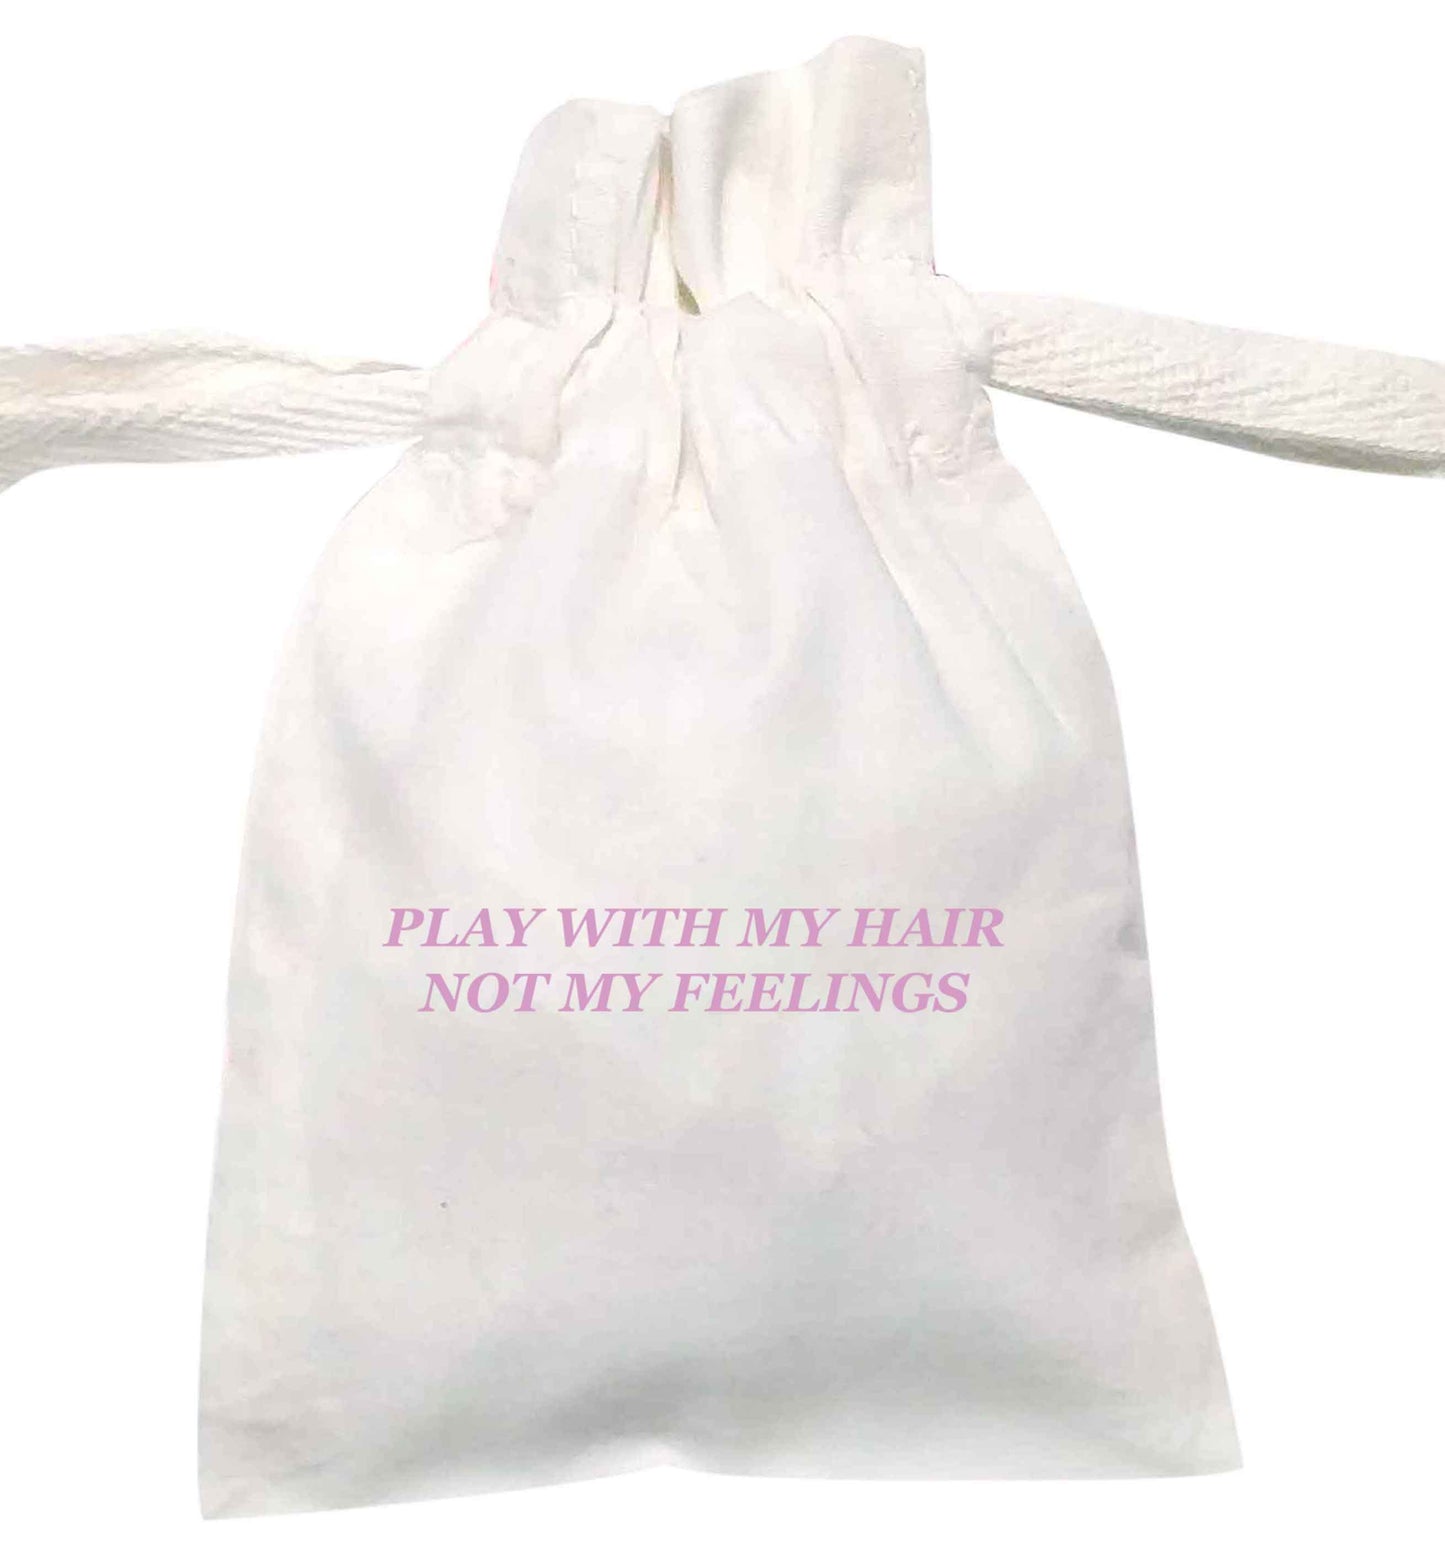 Play with my hair not my feelings | XS - L | Pouch / Drawstring bag / Sack | Organic Cotton | Bulk discounts available!